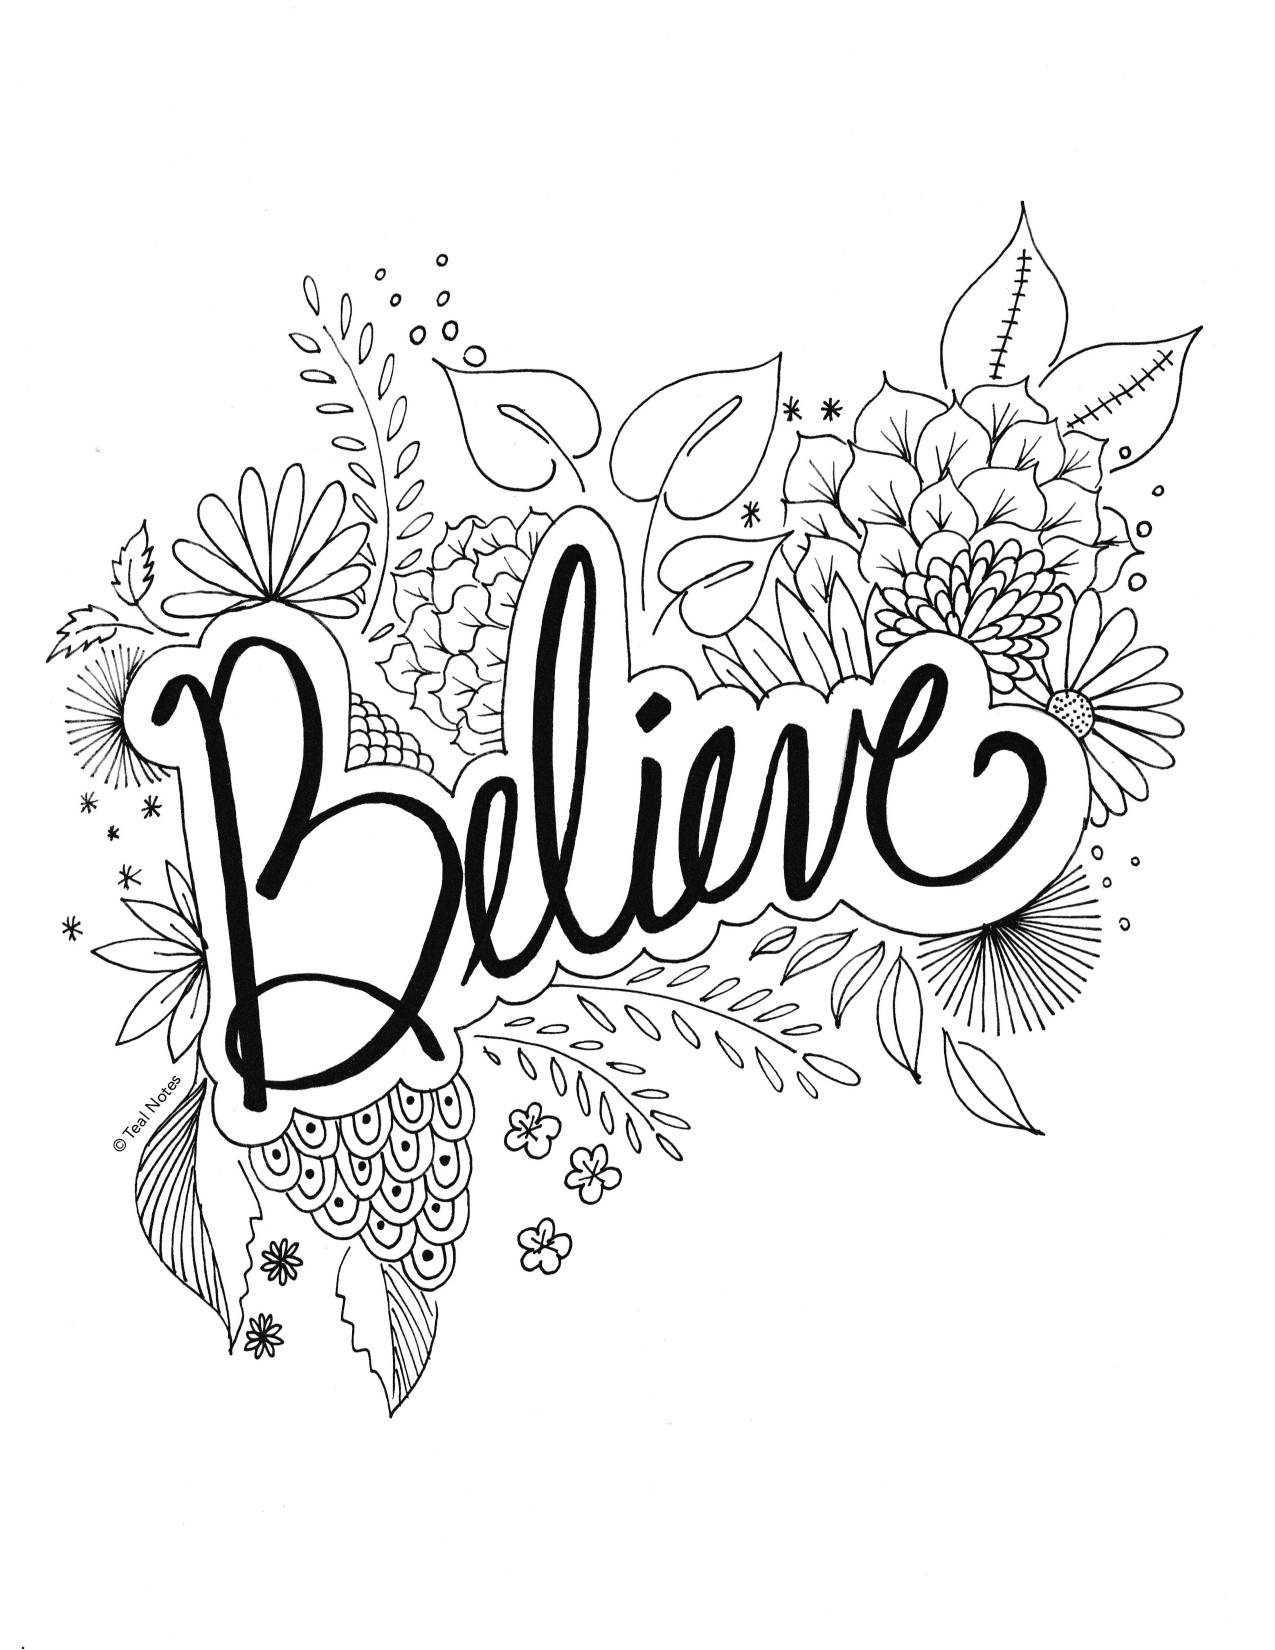 Quote coloring pages you can print and color on your free time